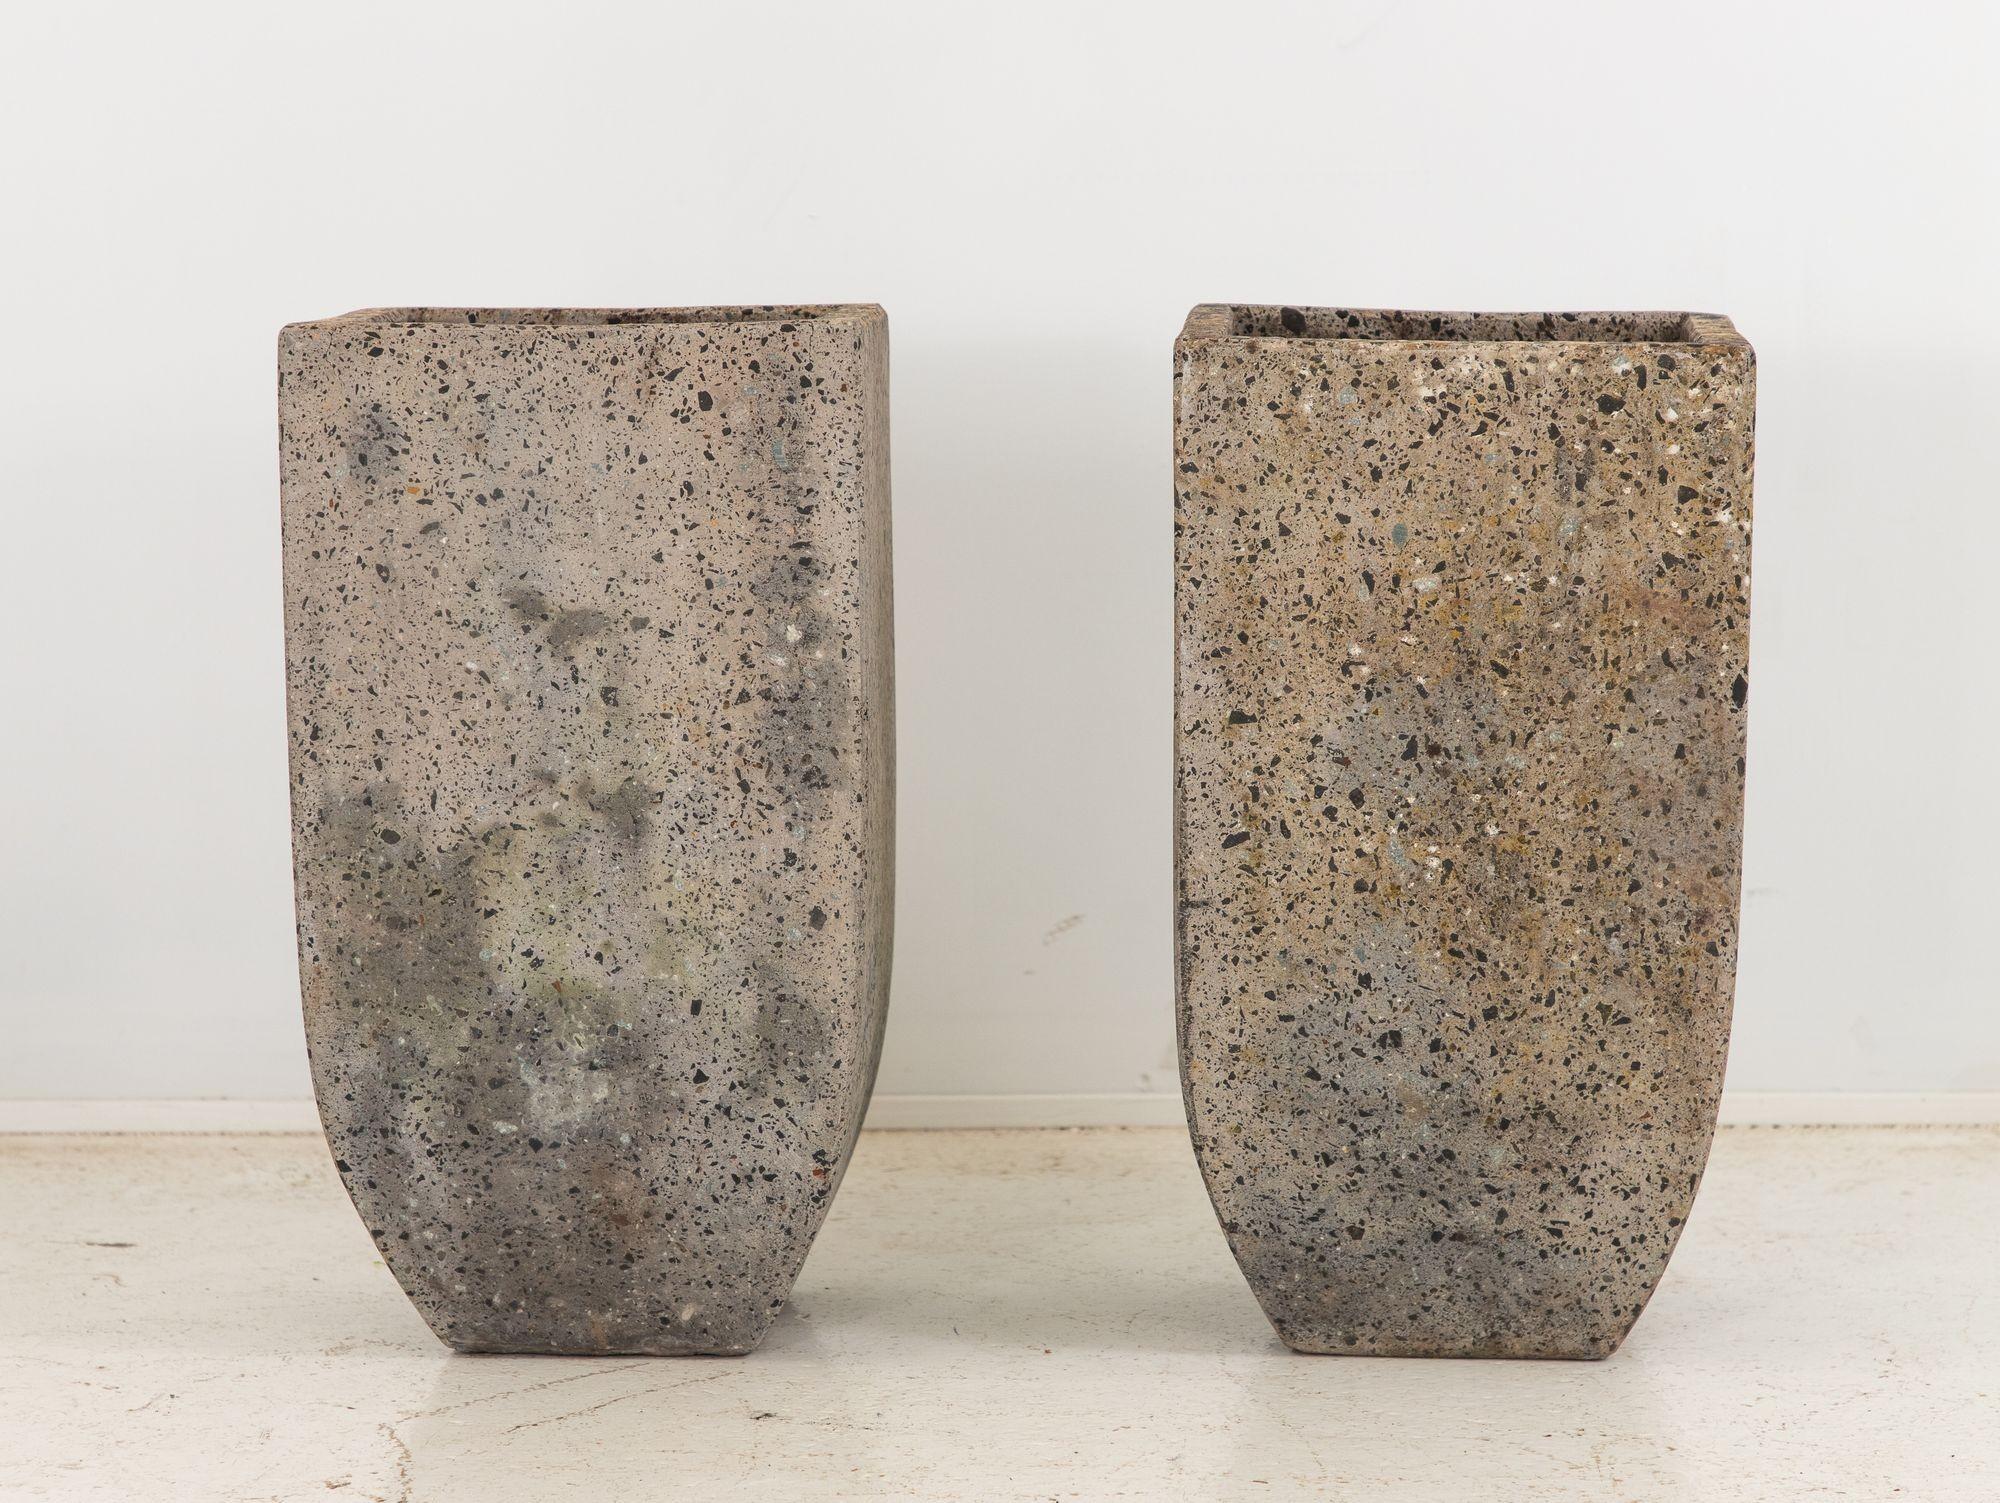 Concrete Brutalist Inspired Pair of Mixed Stone Planters, 20th Century For Sale